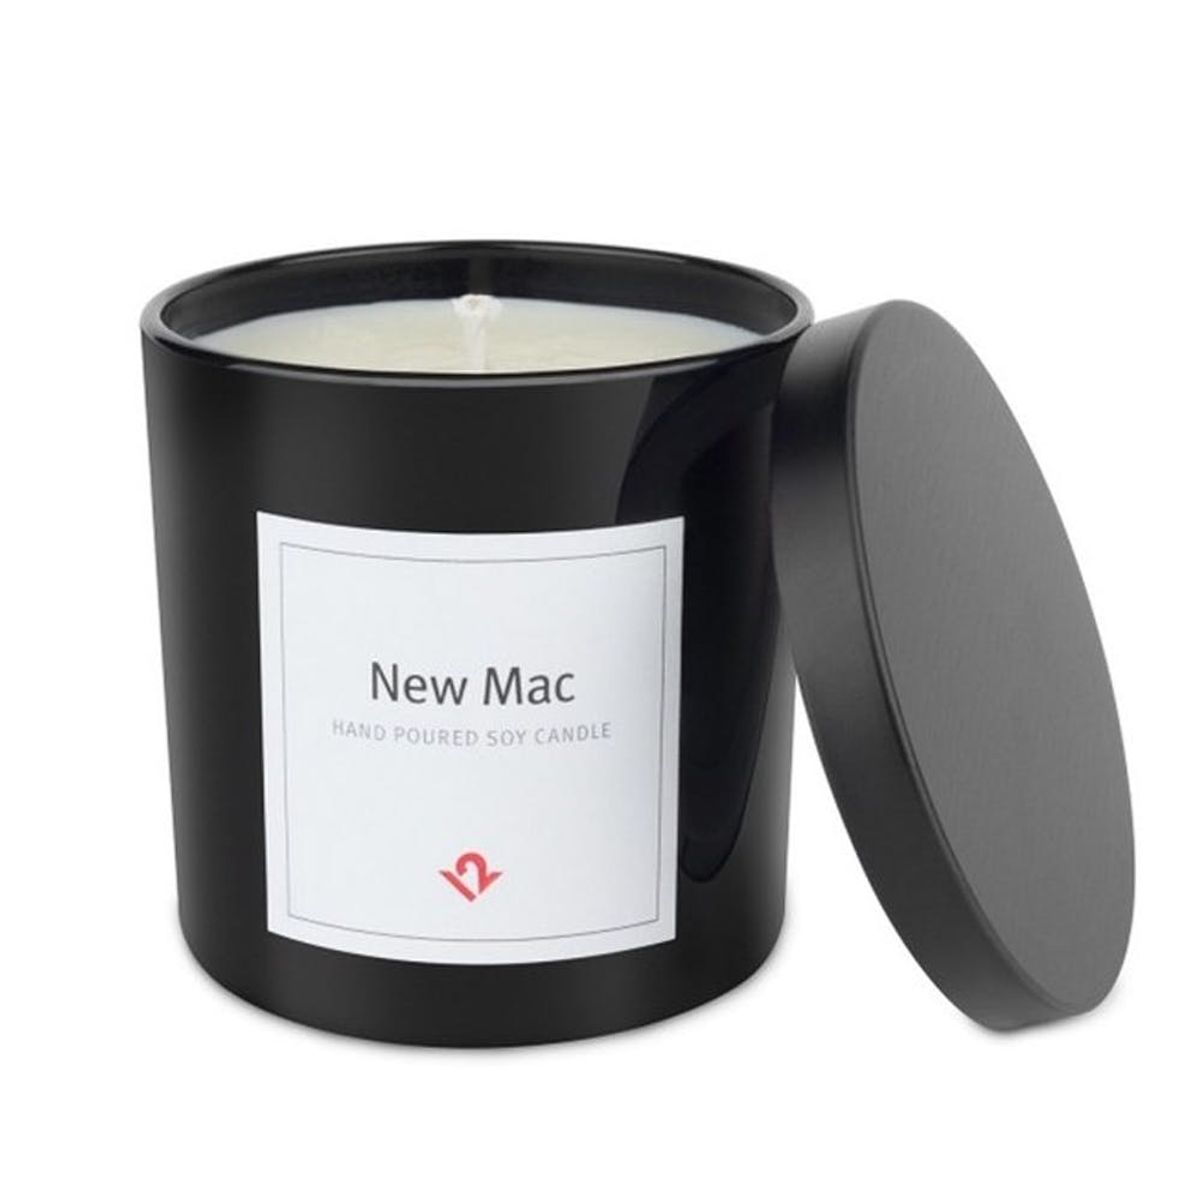 Forget Tahitian Vanilla, Now You Can Make Your House Smell Like an Apple Store